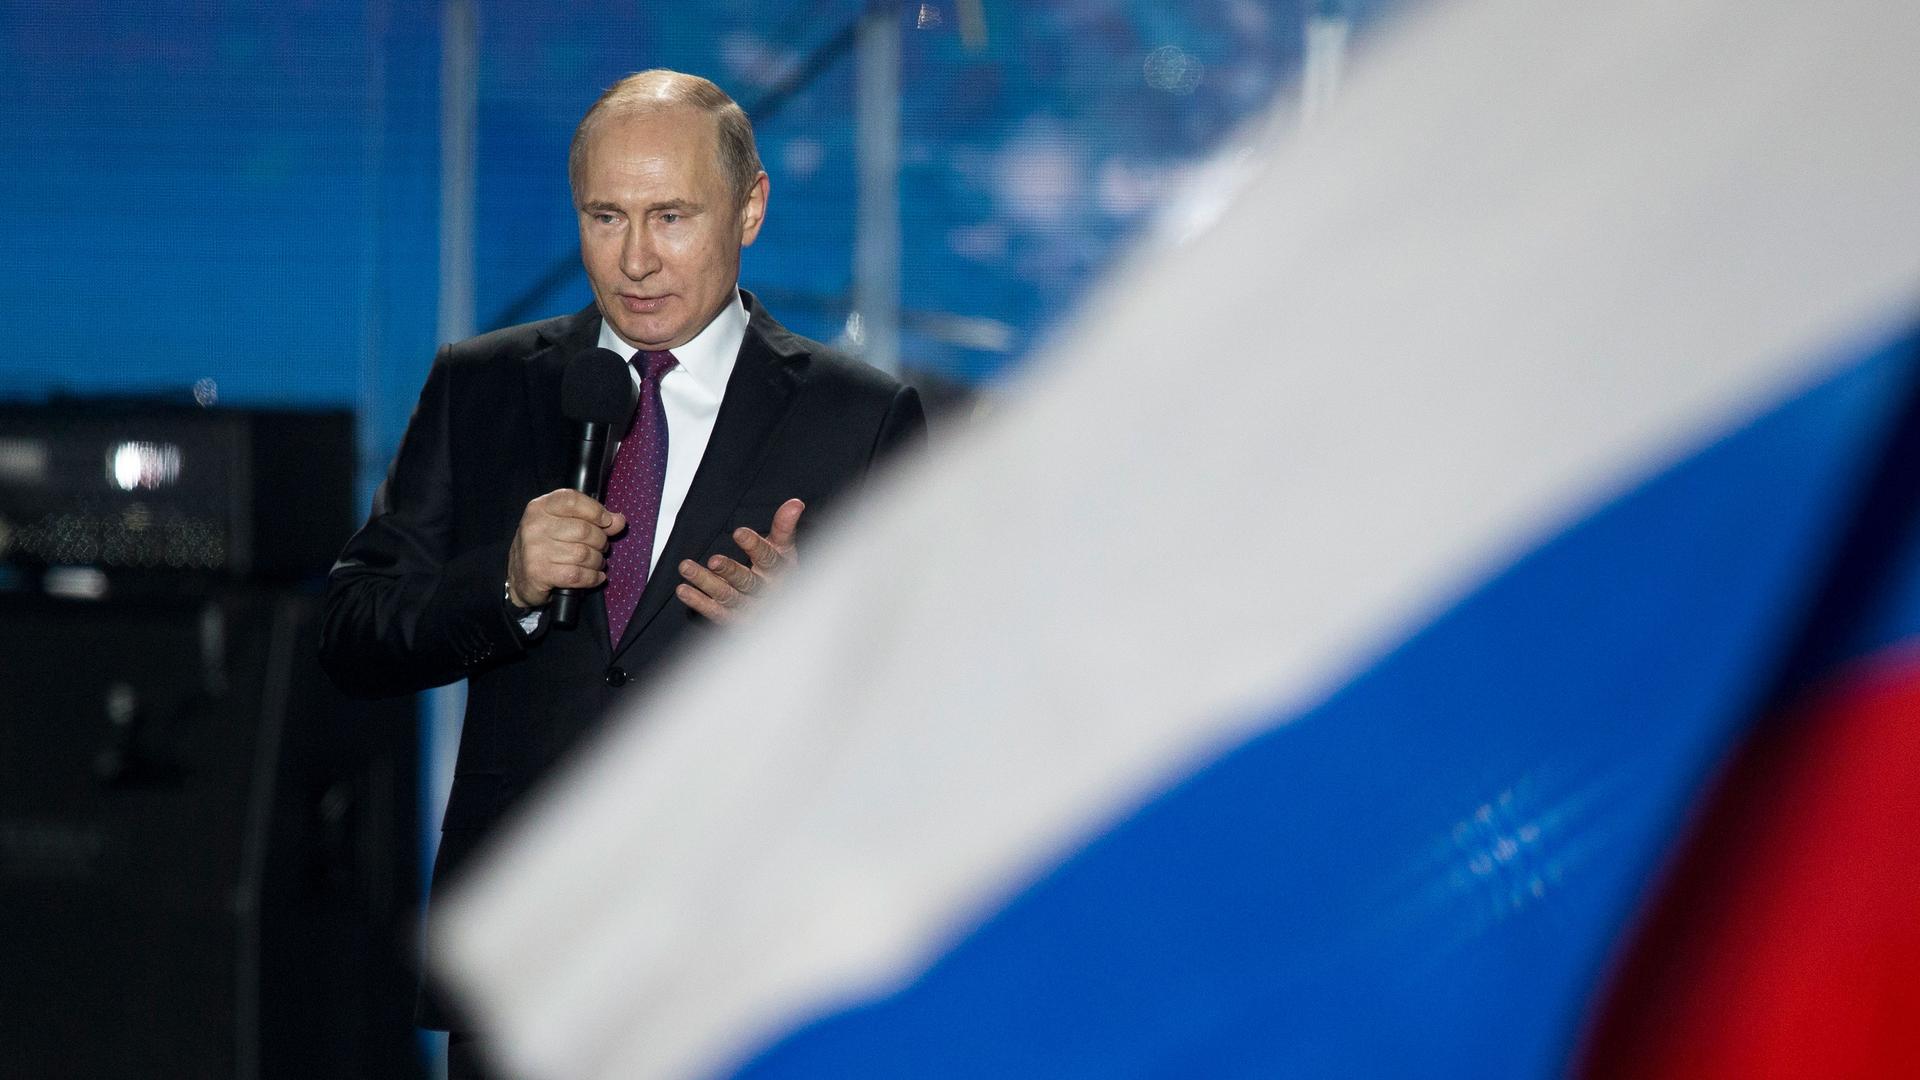 Russian President Vladimir Putin is shown speaking into a microphone and wearing a dark suit.